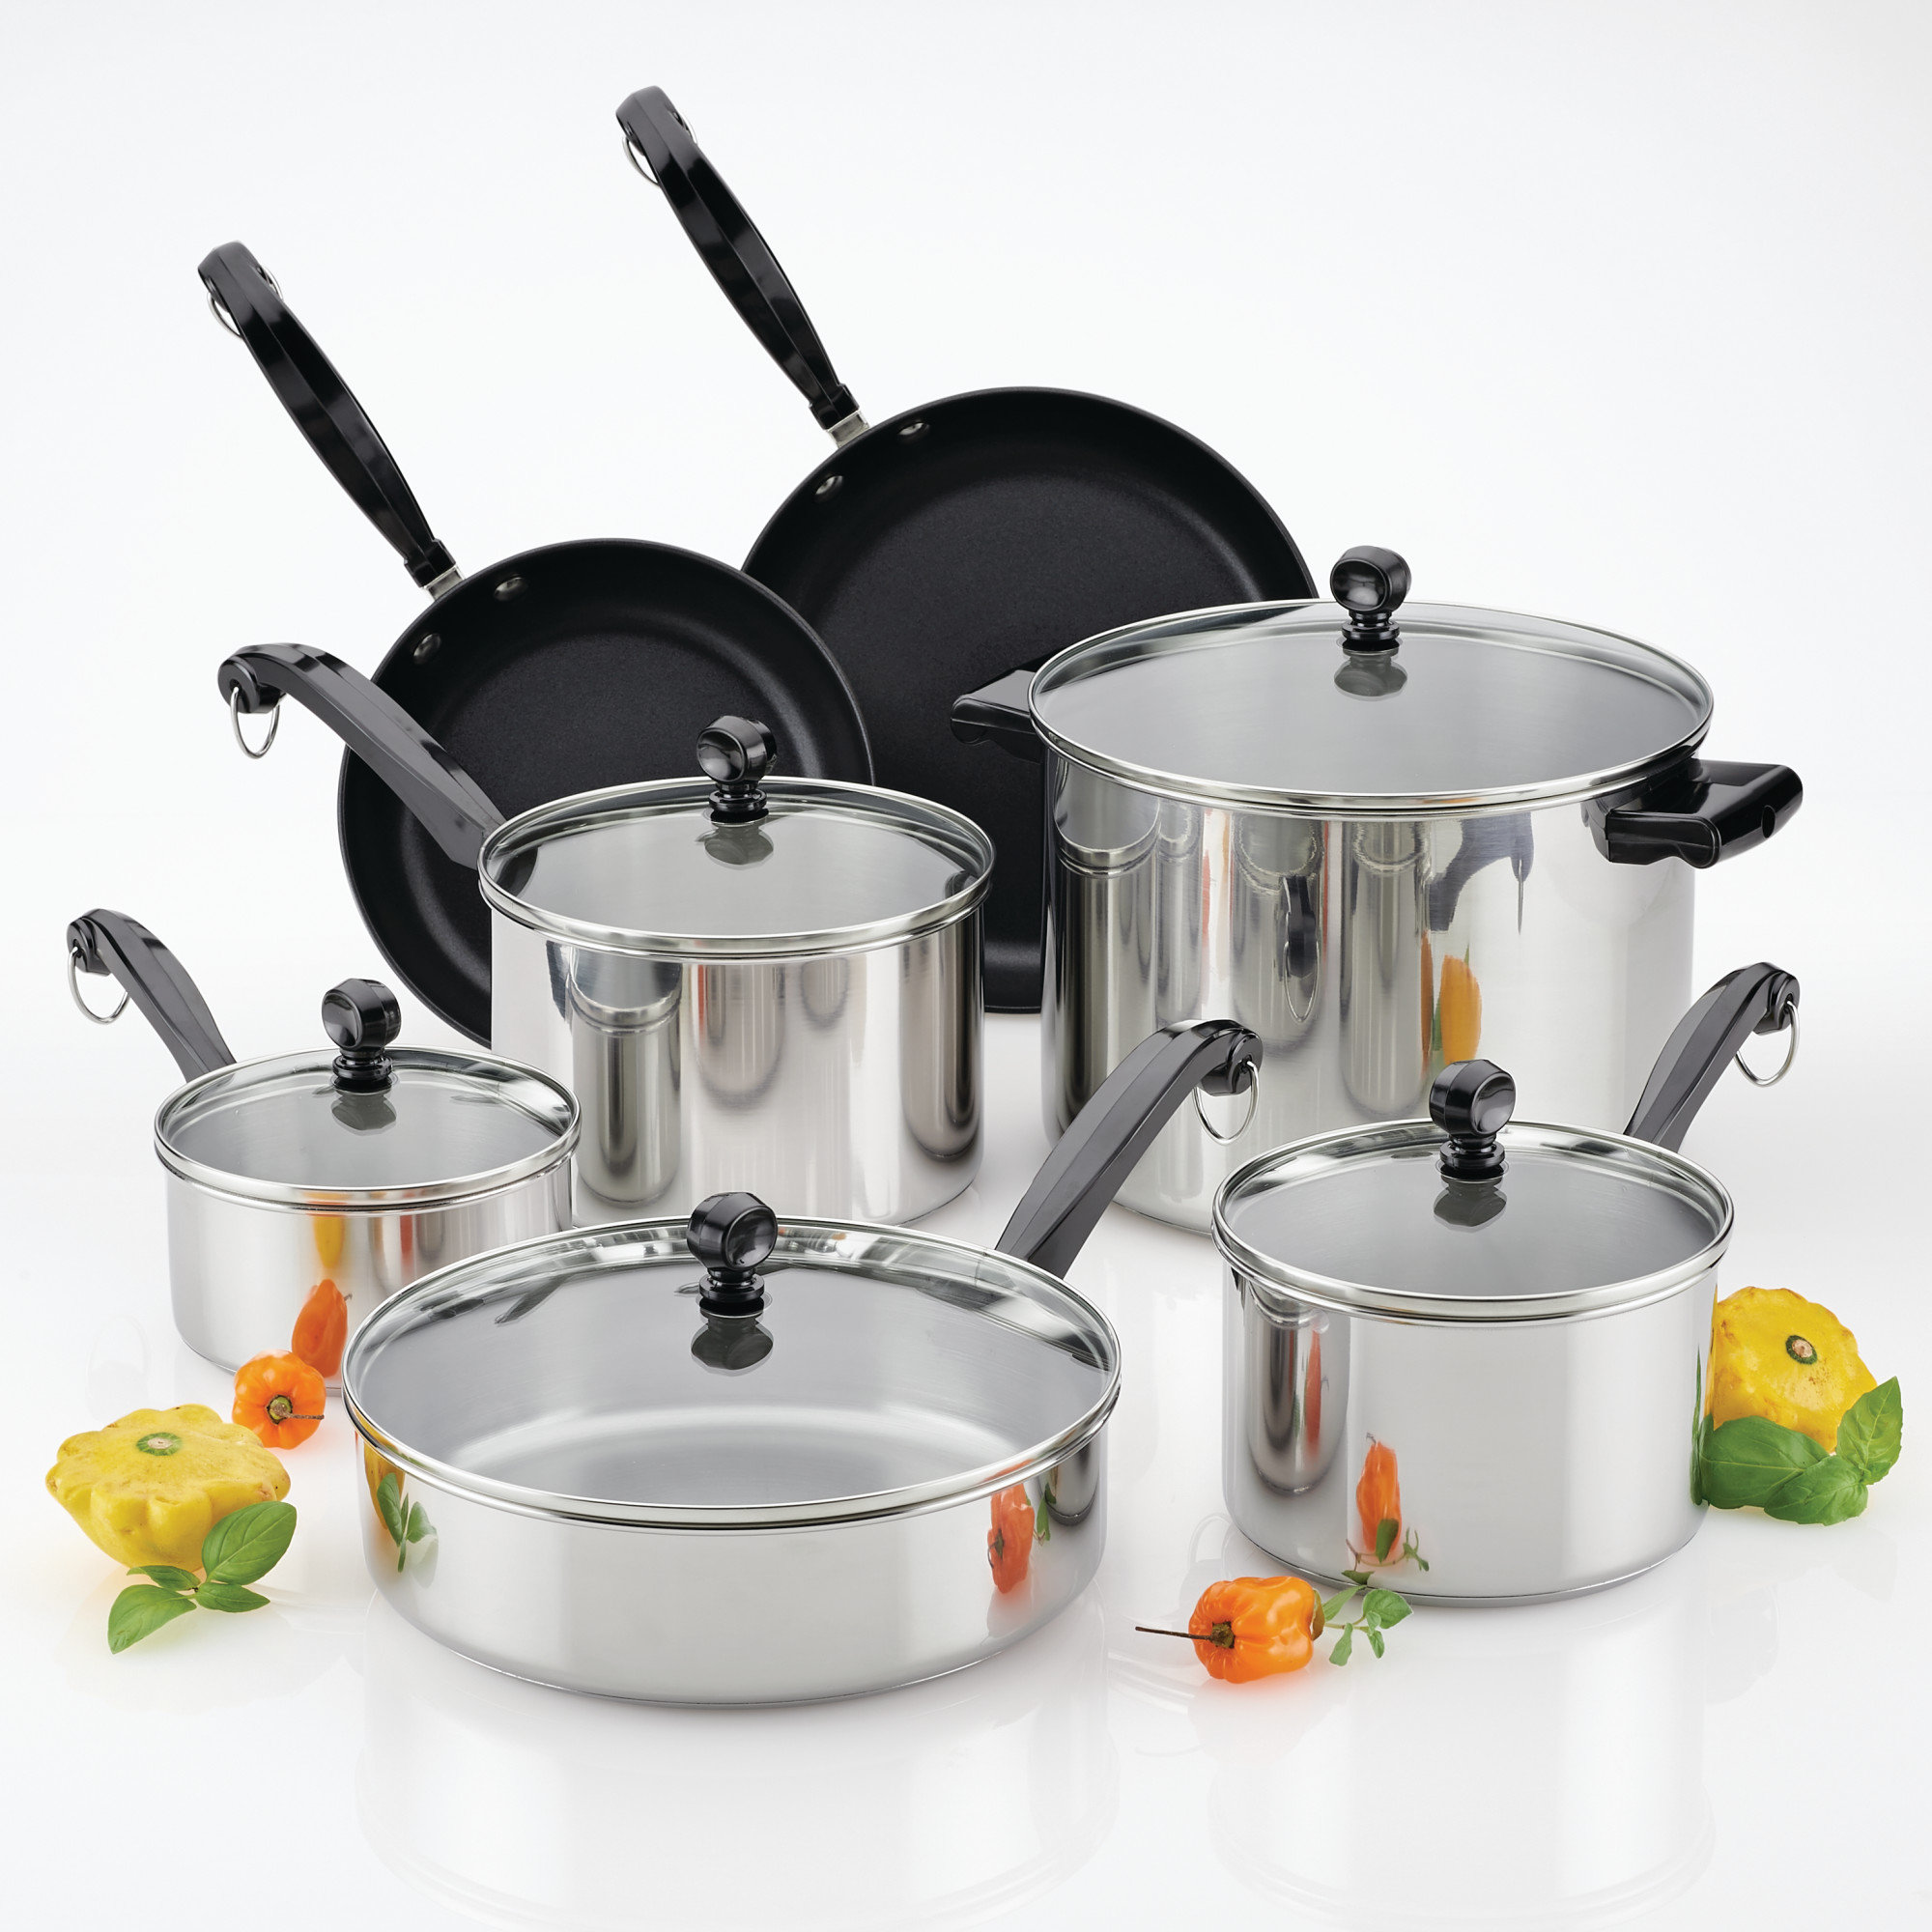 Farberware Classic Series Stainless Steel Cookware Pots and Pans